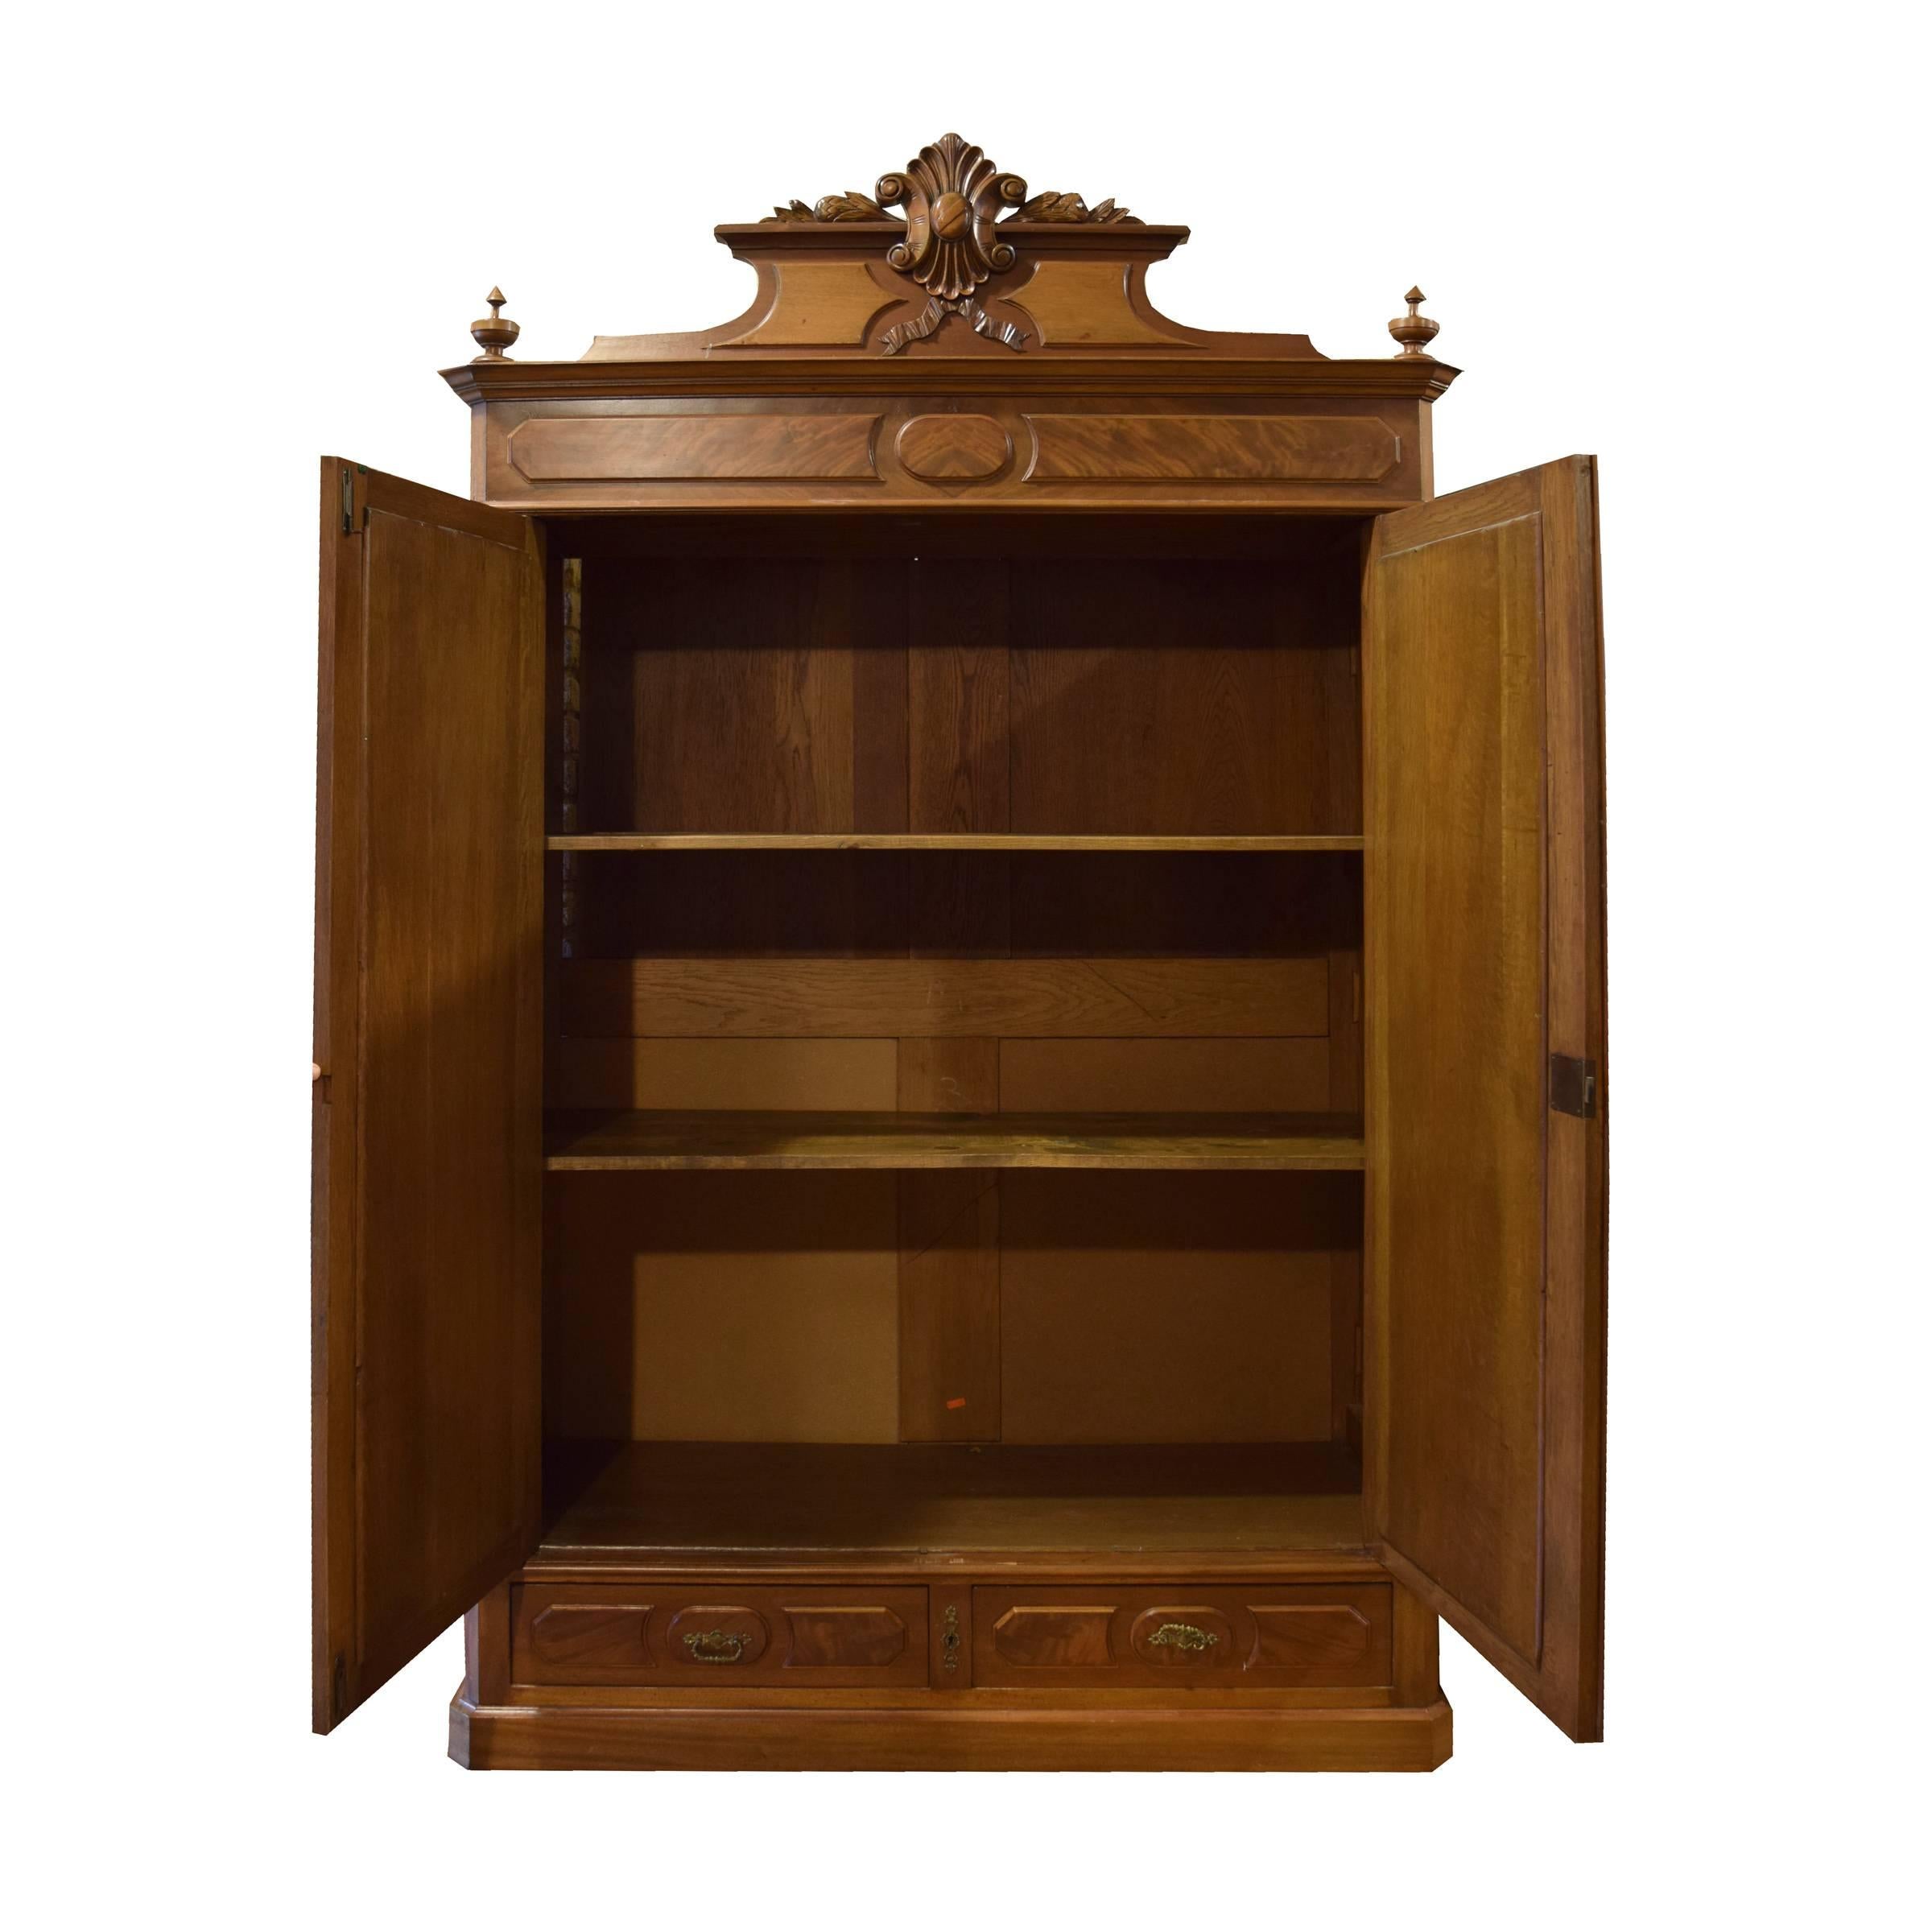 An American two-door mirrored armoire with three shelves and two drawers.